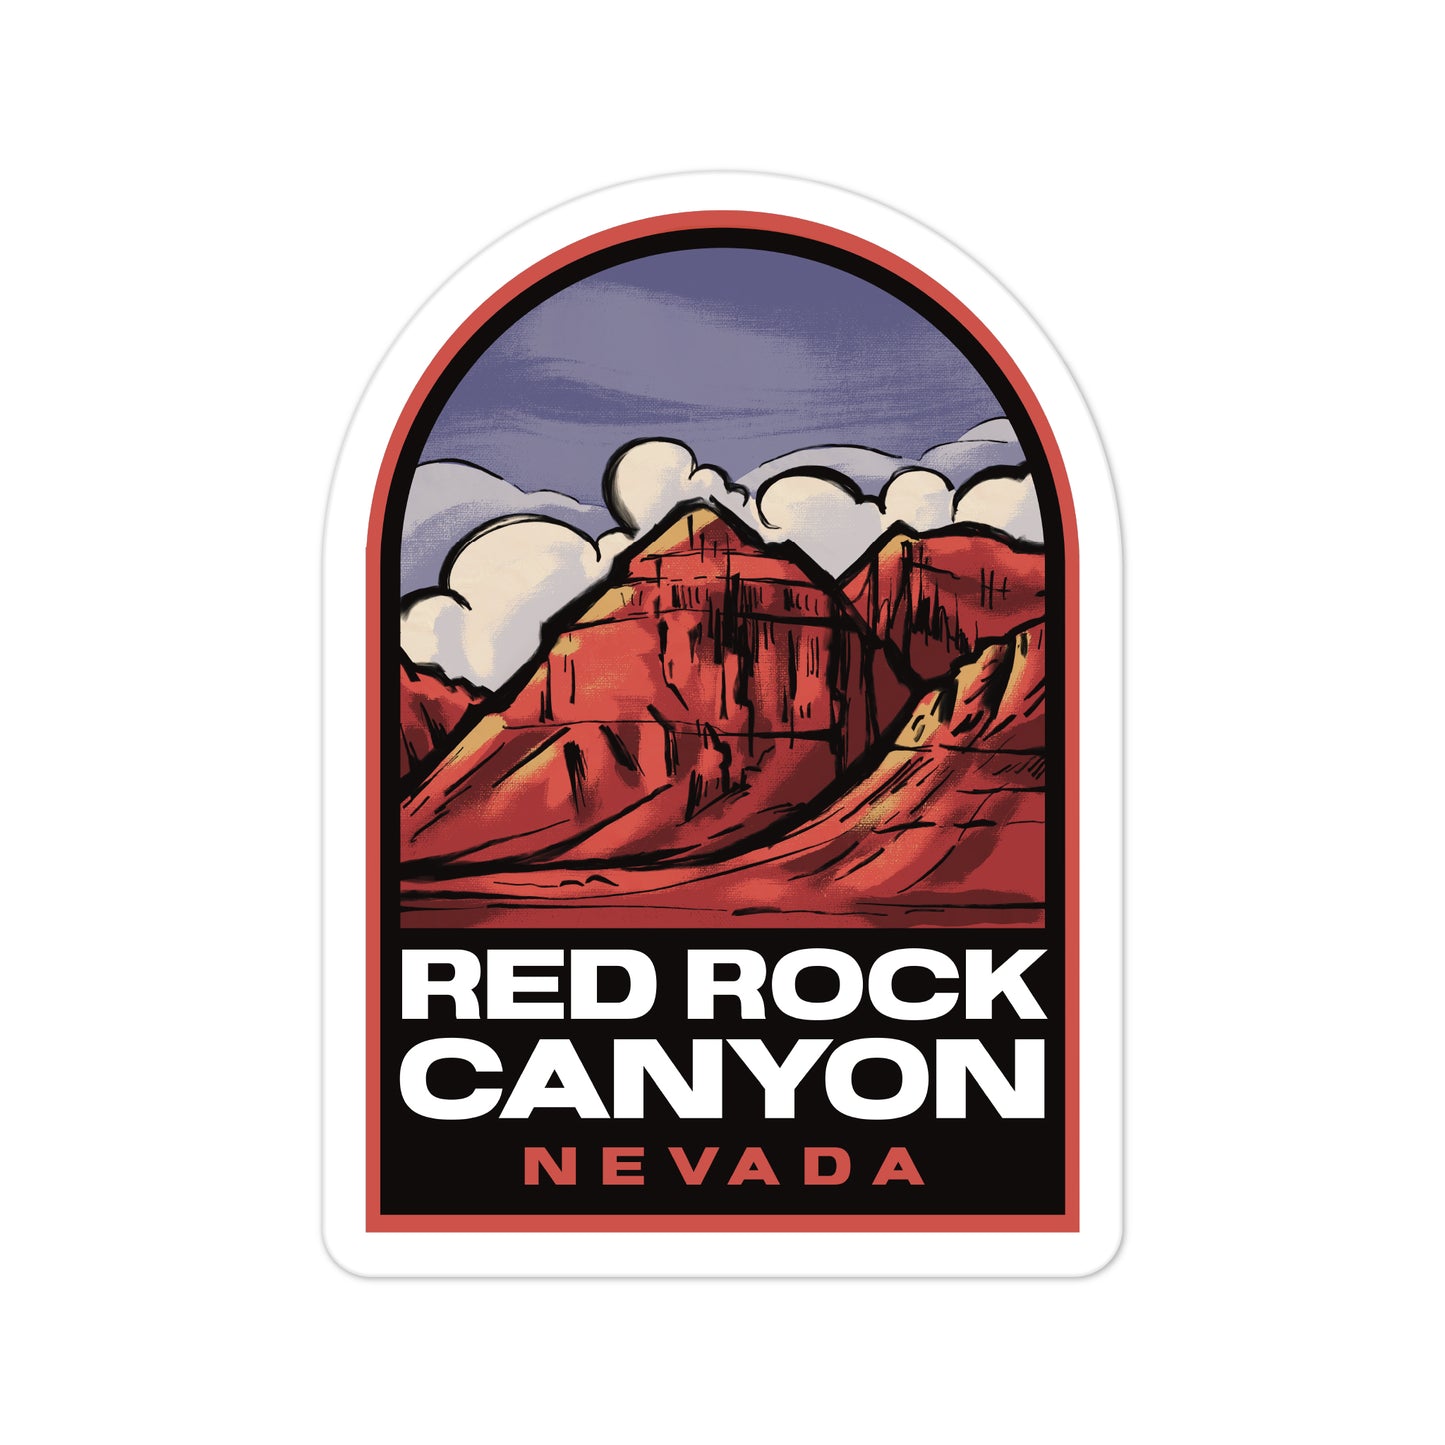 A sticker of Red Rock Canyon Nevada